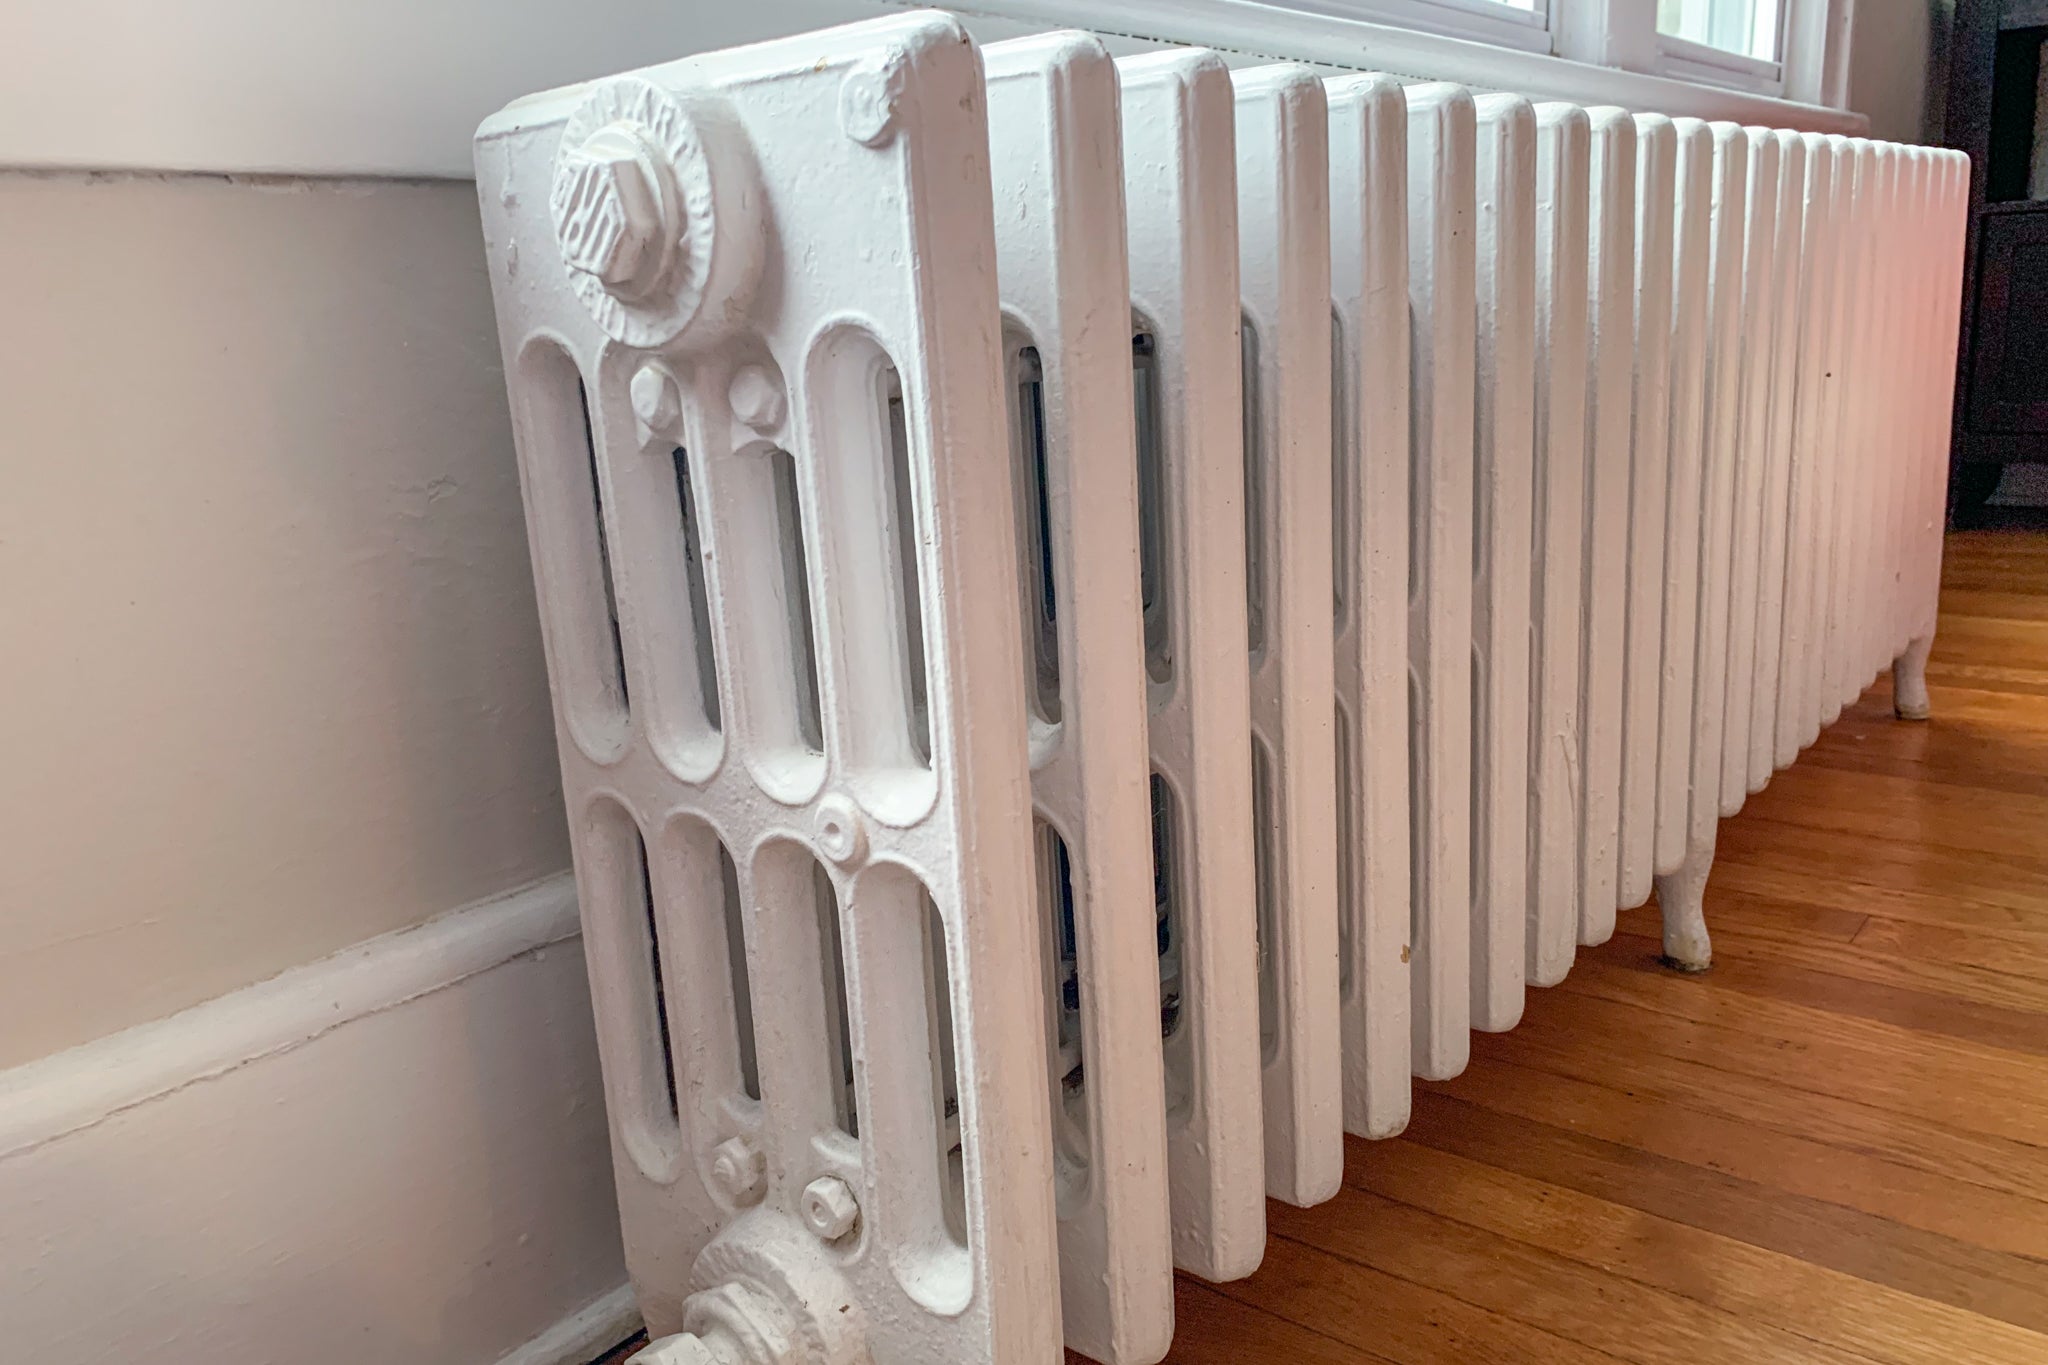 How to Clean a Radiator